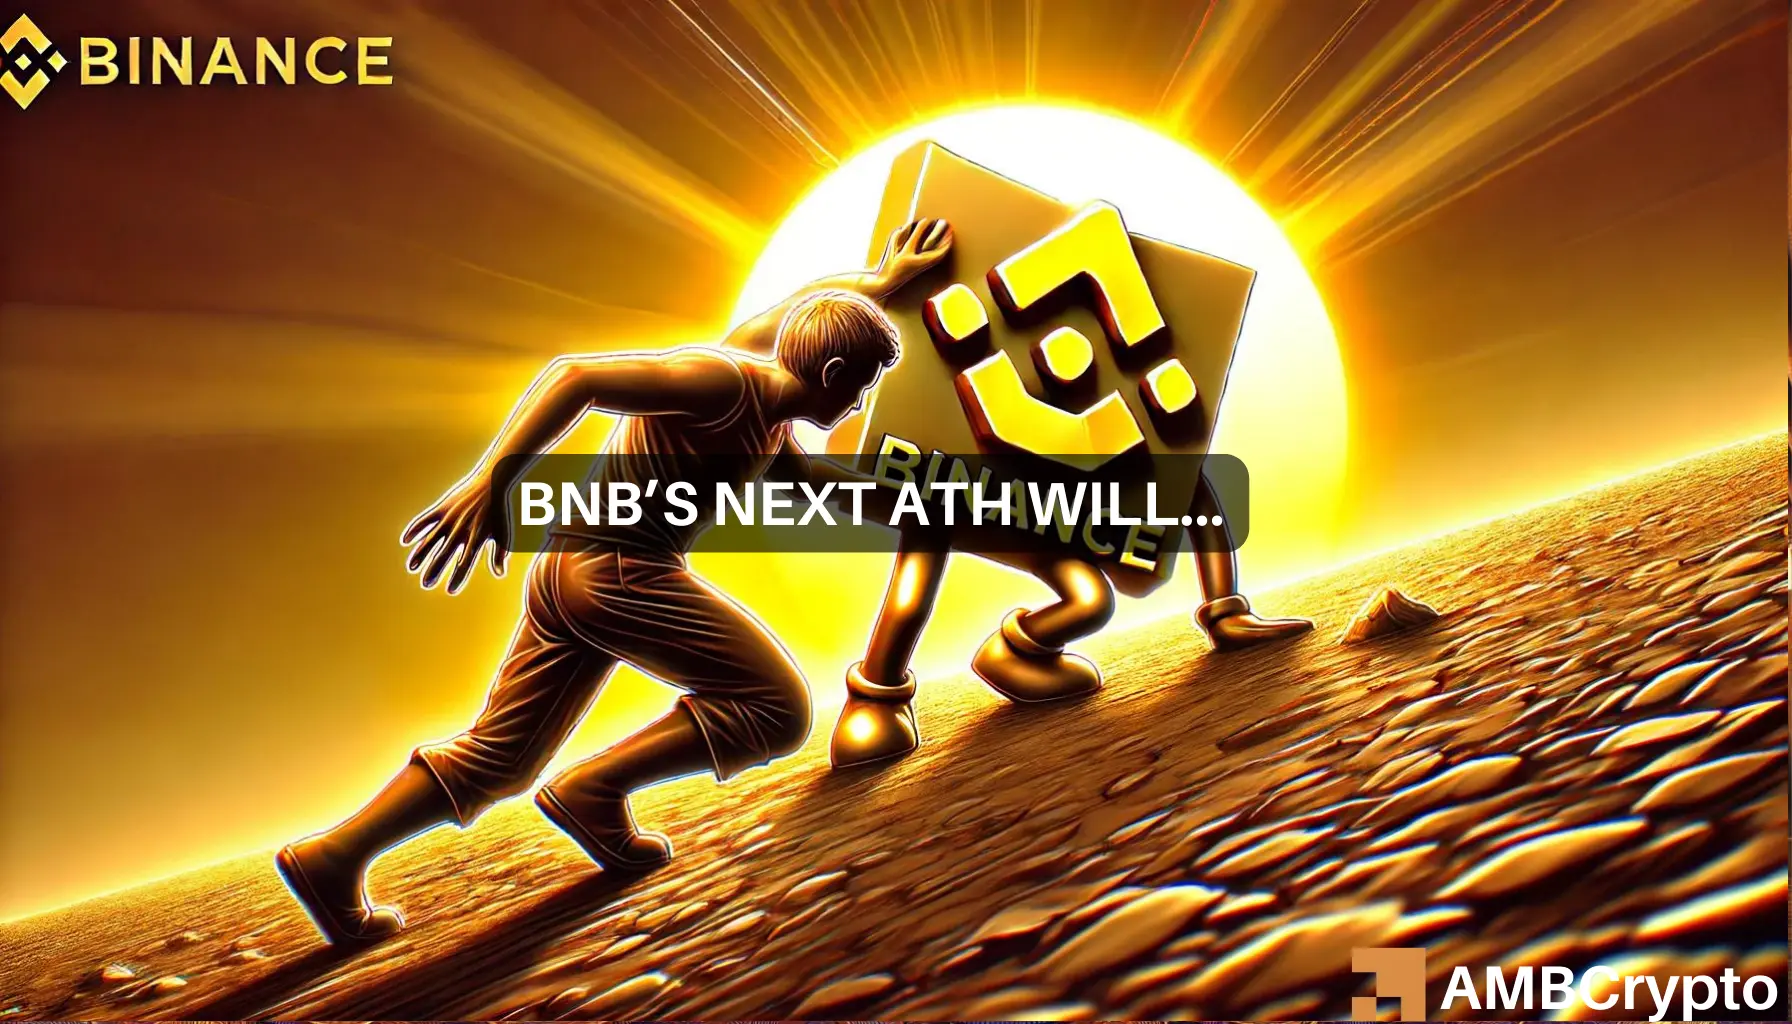 ‘Off by 15%’ – How BNB’s price can register its next ATH